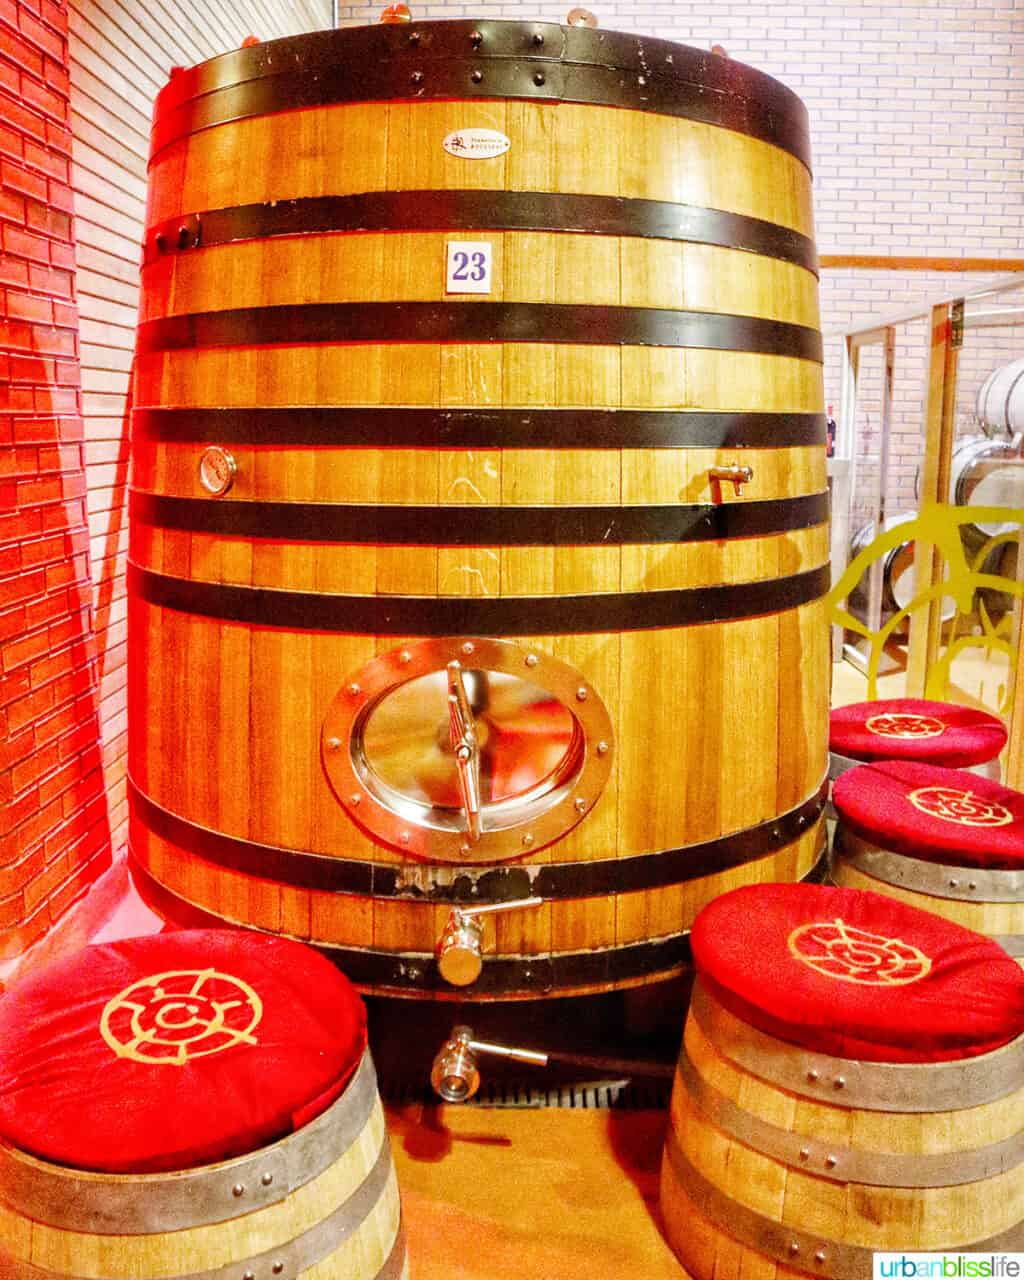 large wine barrel with wine barrel seating at Arba winery in Kazakhstan.